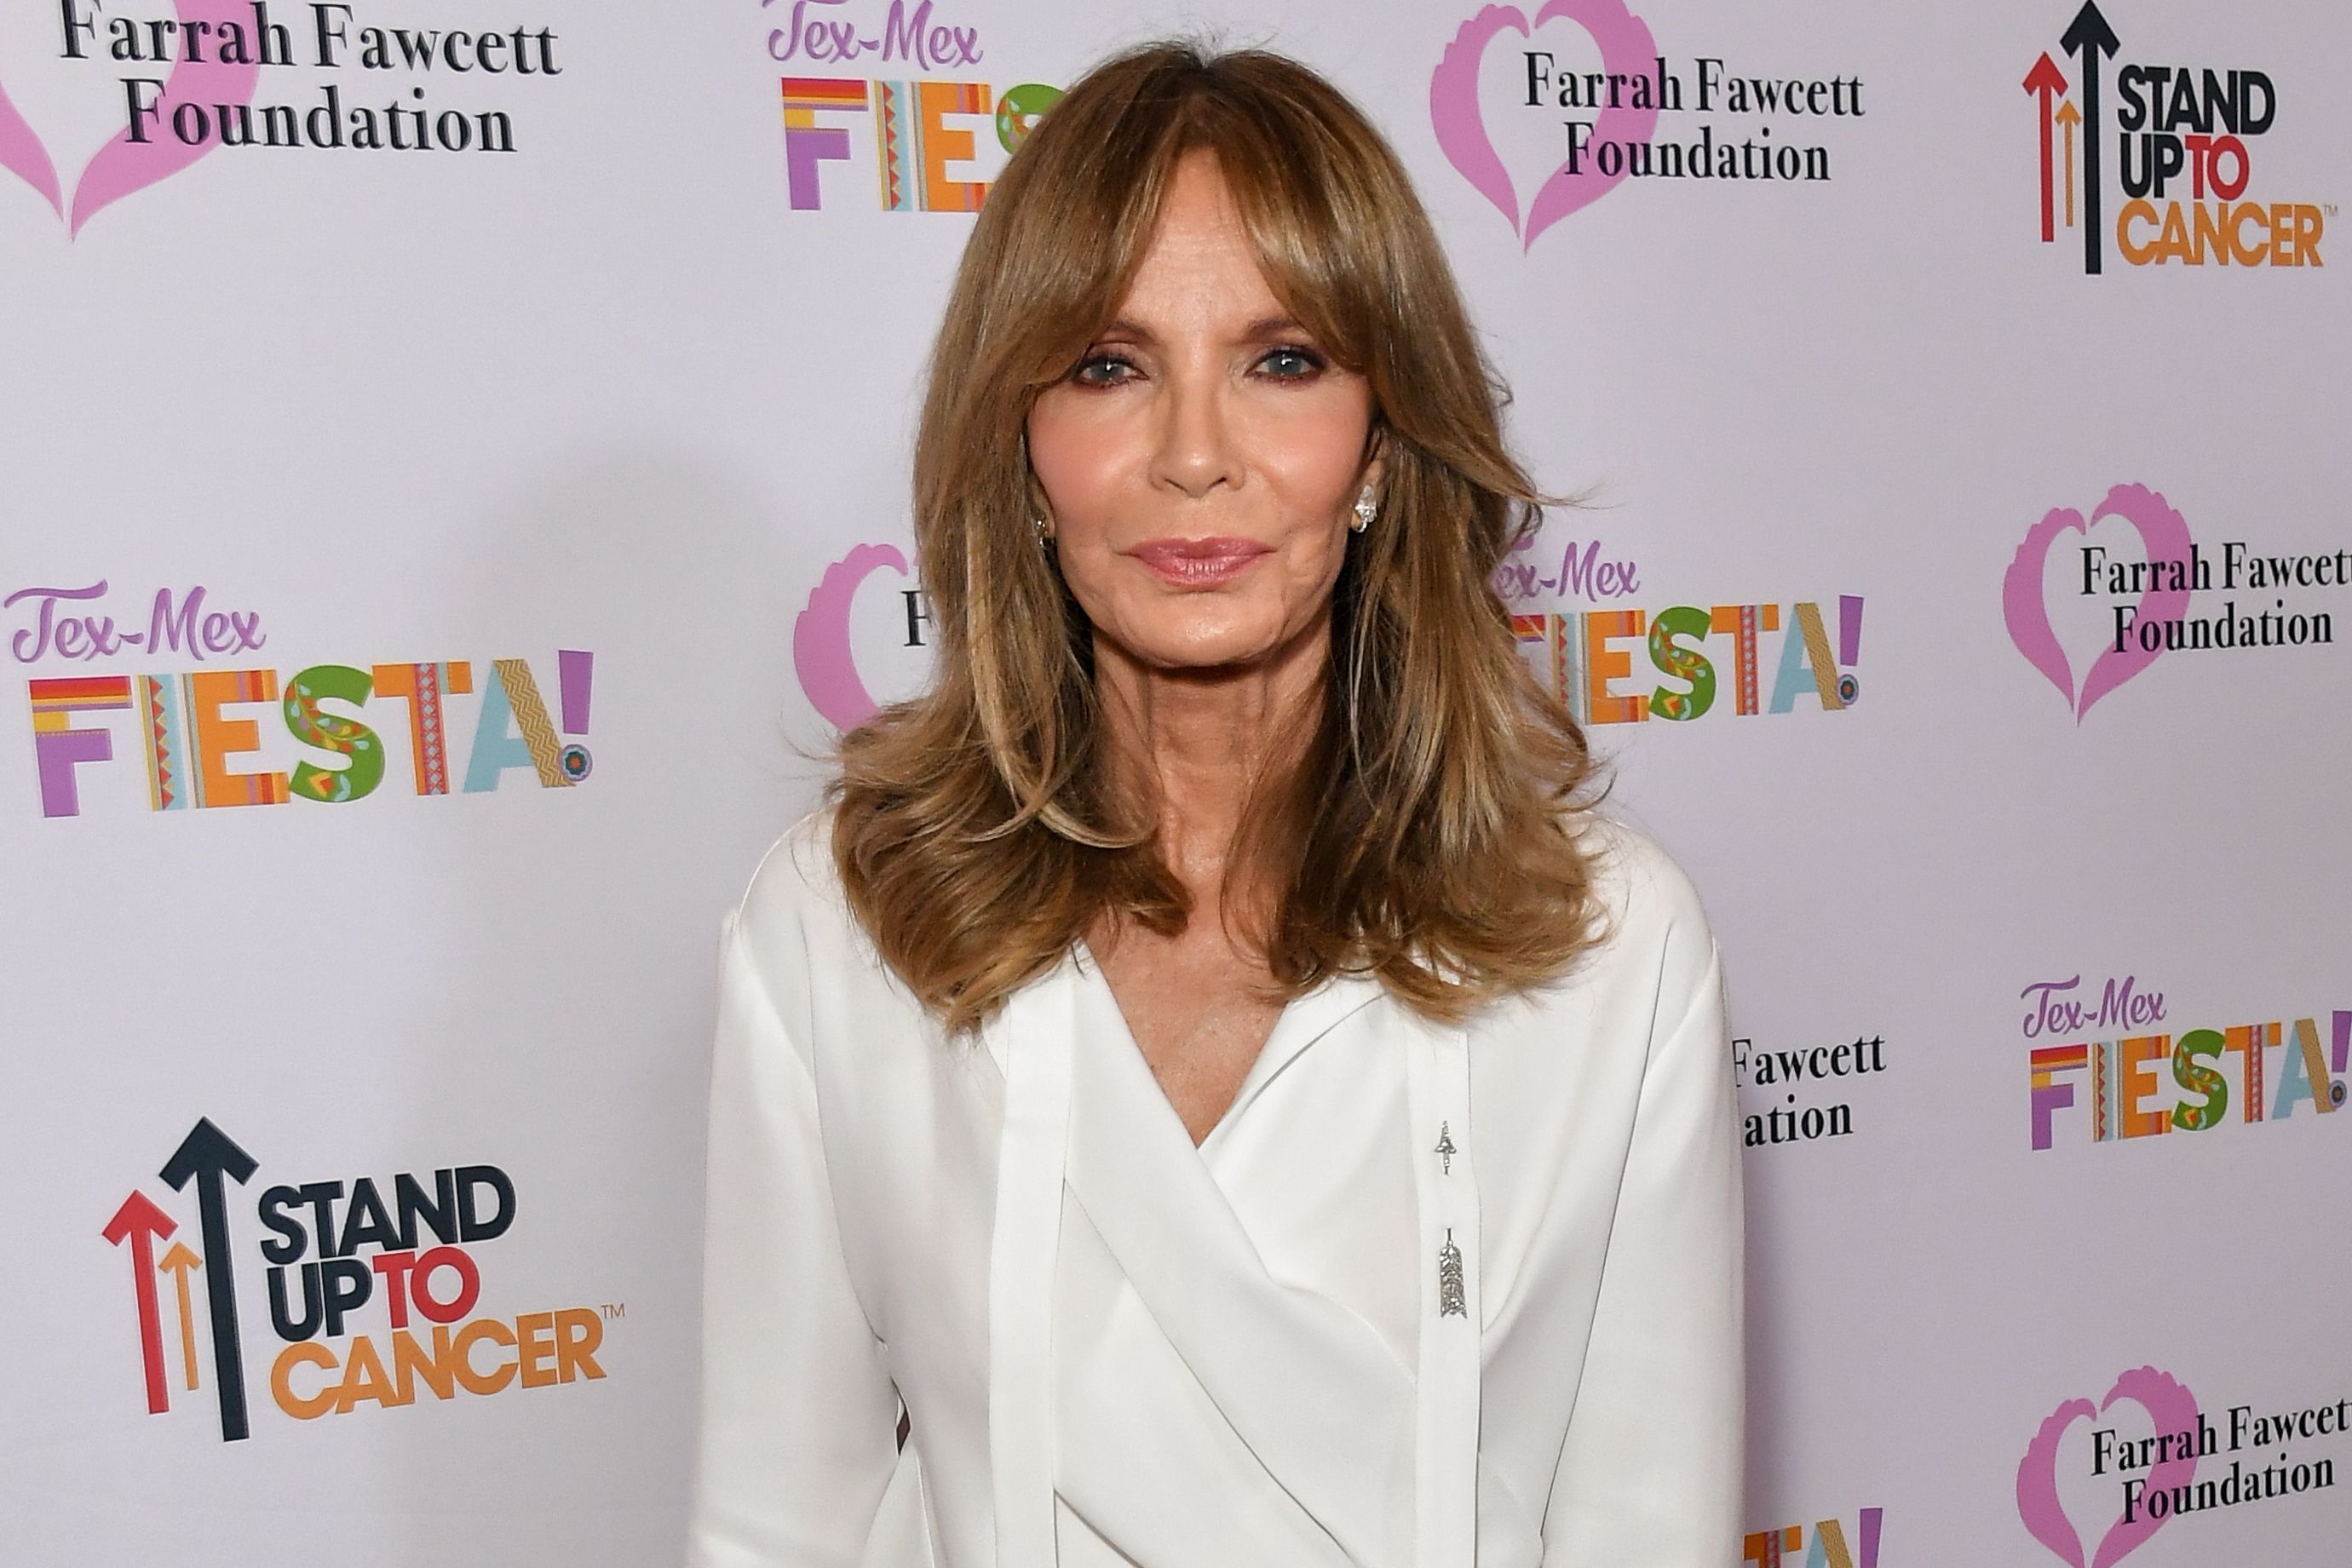 Jaclyn smith images